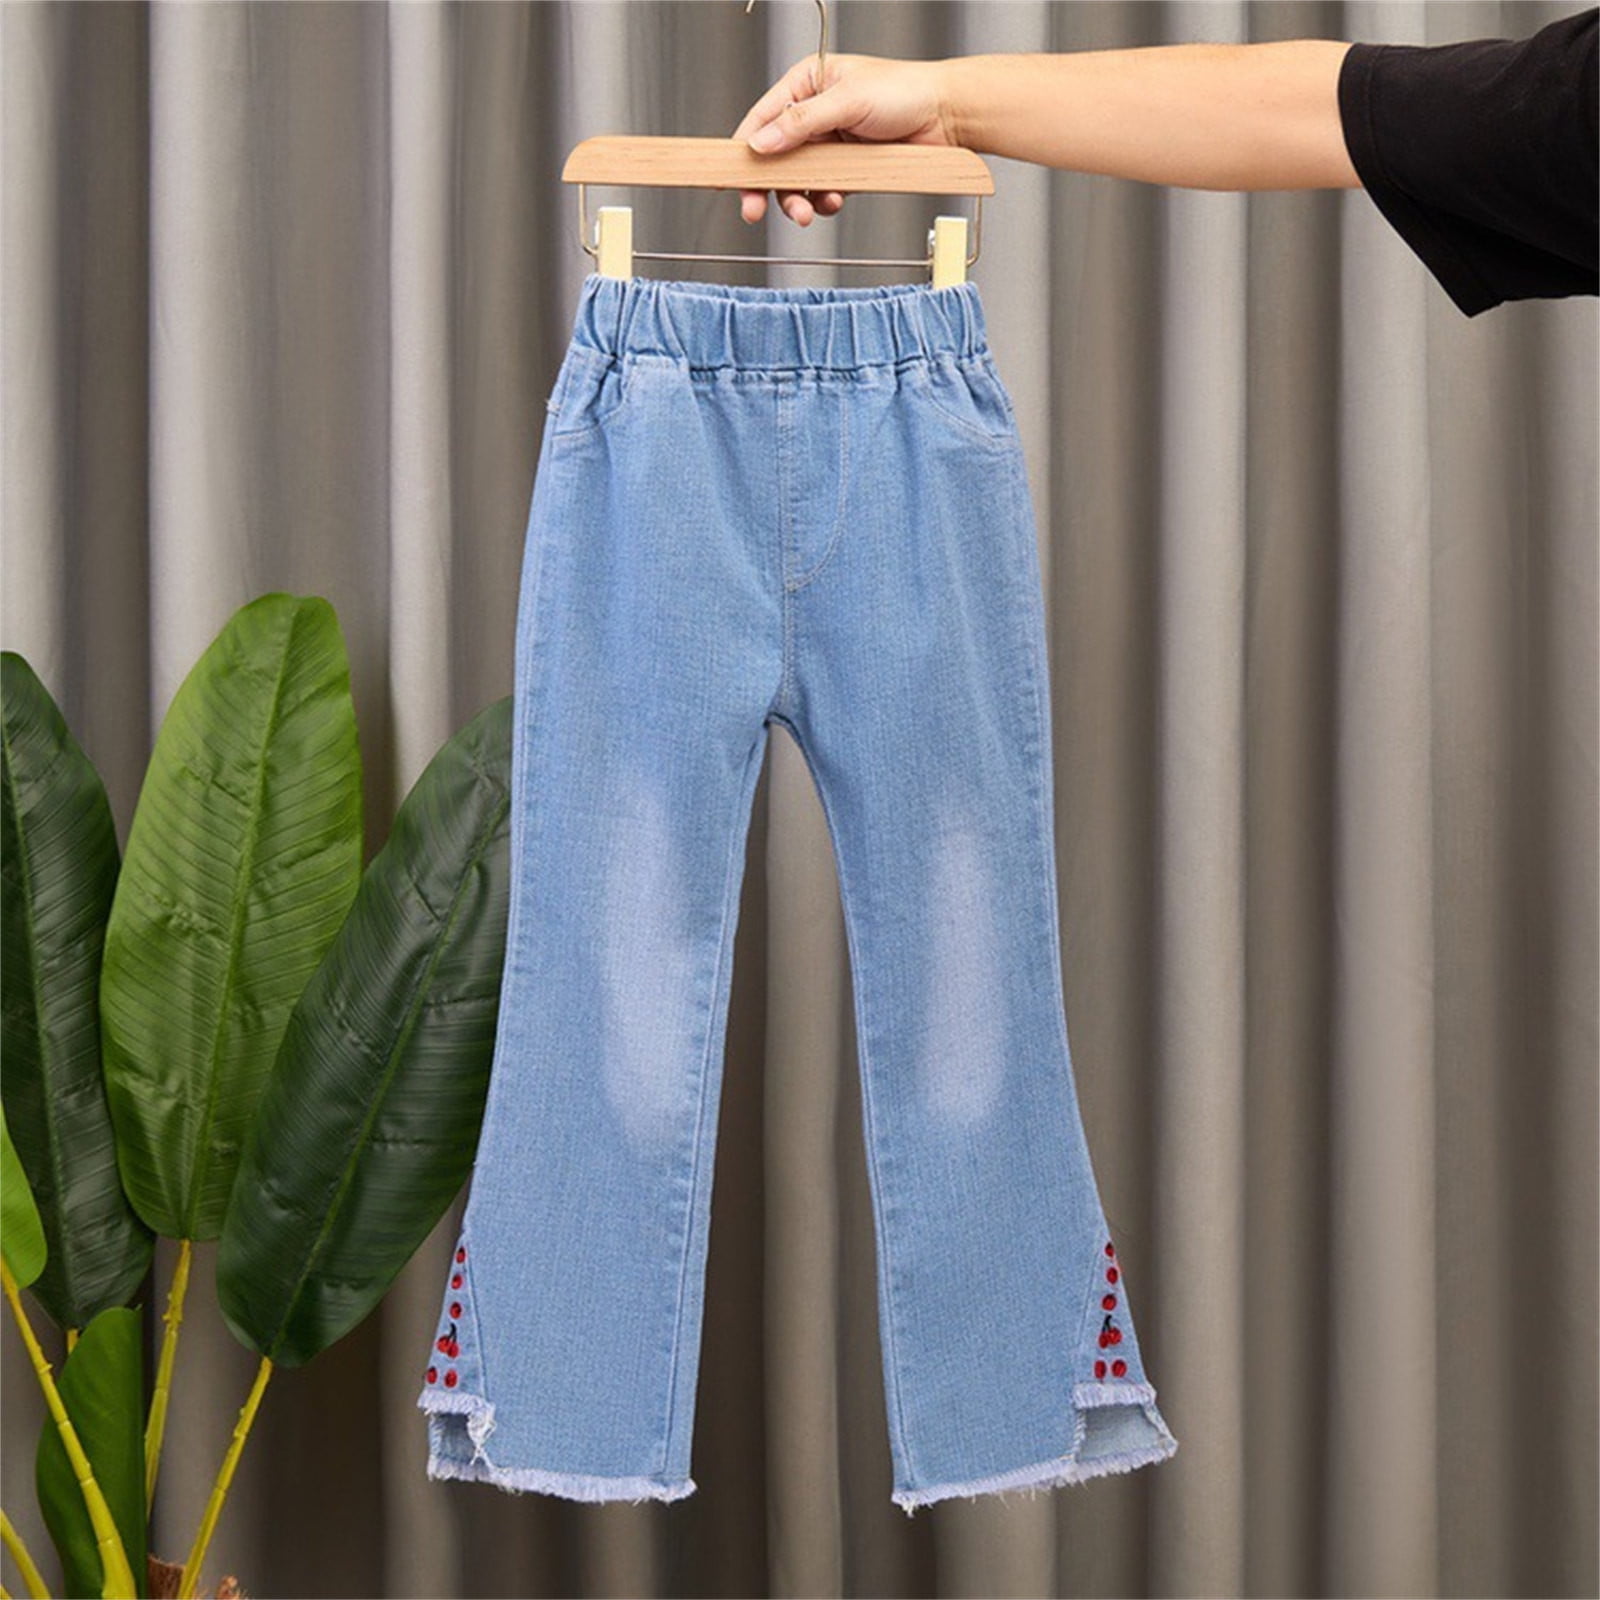 Girls,Flare Wide Flared Delas!2-13 Girls,Toddler Girls,Toddler Flare for Baby Jeans,Girls Years Leg Jeans,Girls Girls Jeans Bootcut Jeans Flare Baggy Pants,Bootcut Jeans Jeans